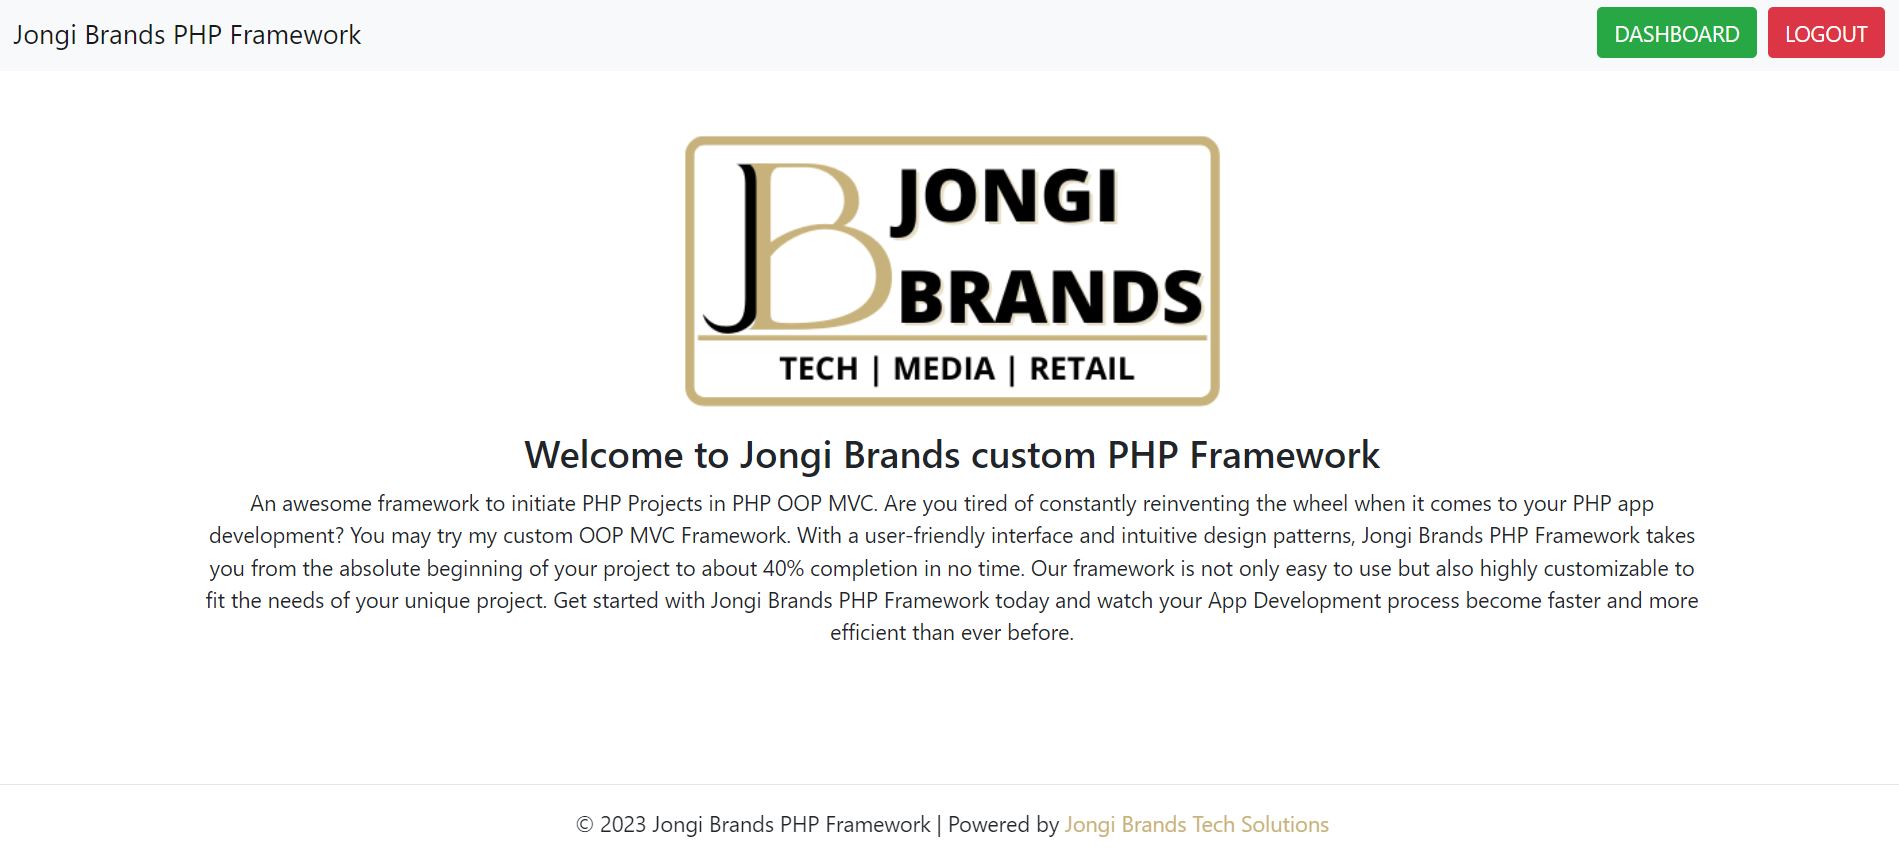 ongi Brands PHP Framework Home Page Image